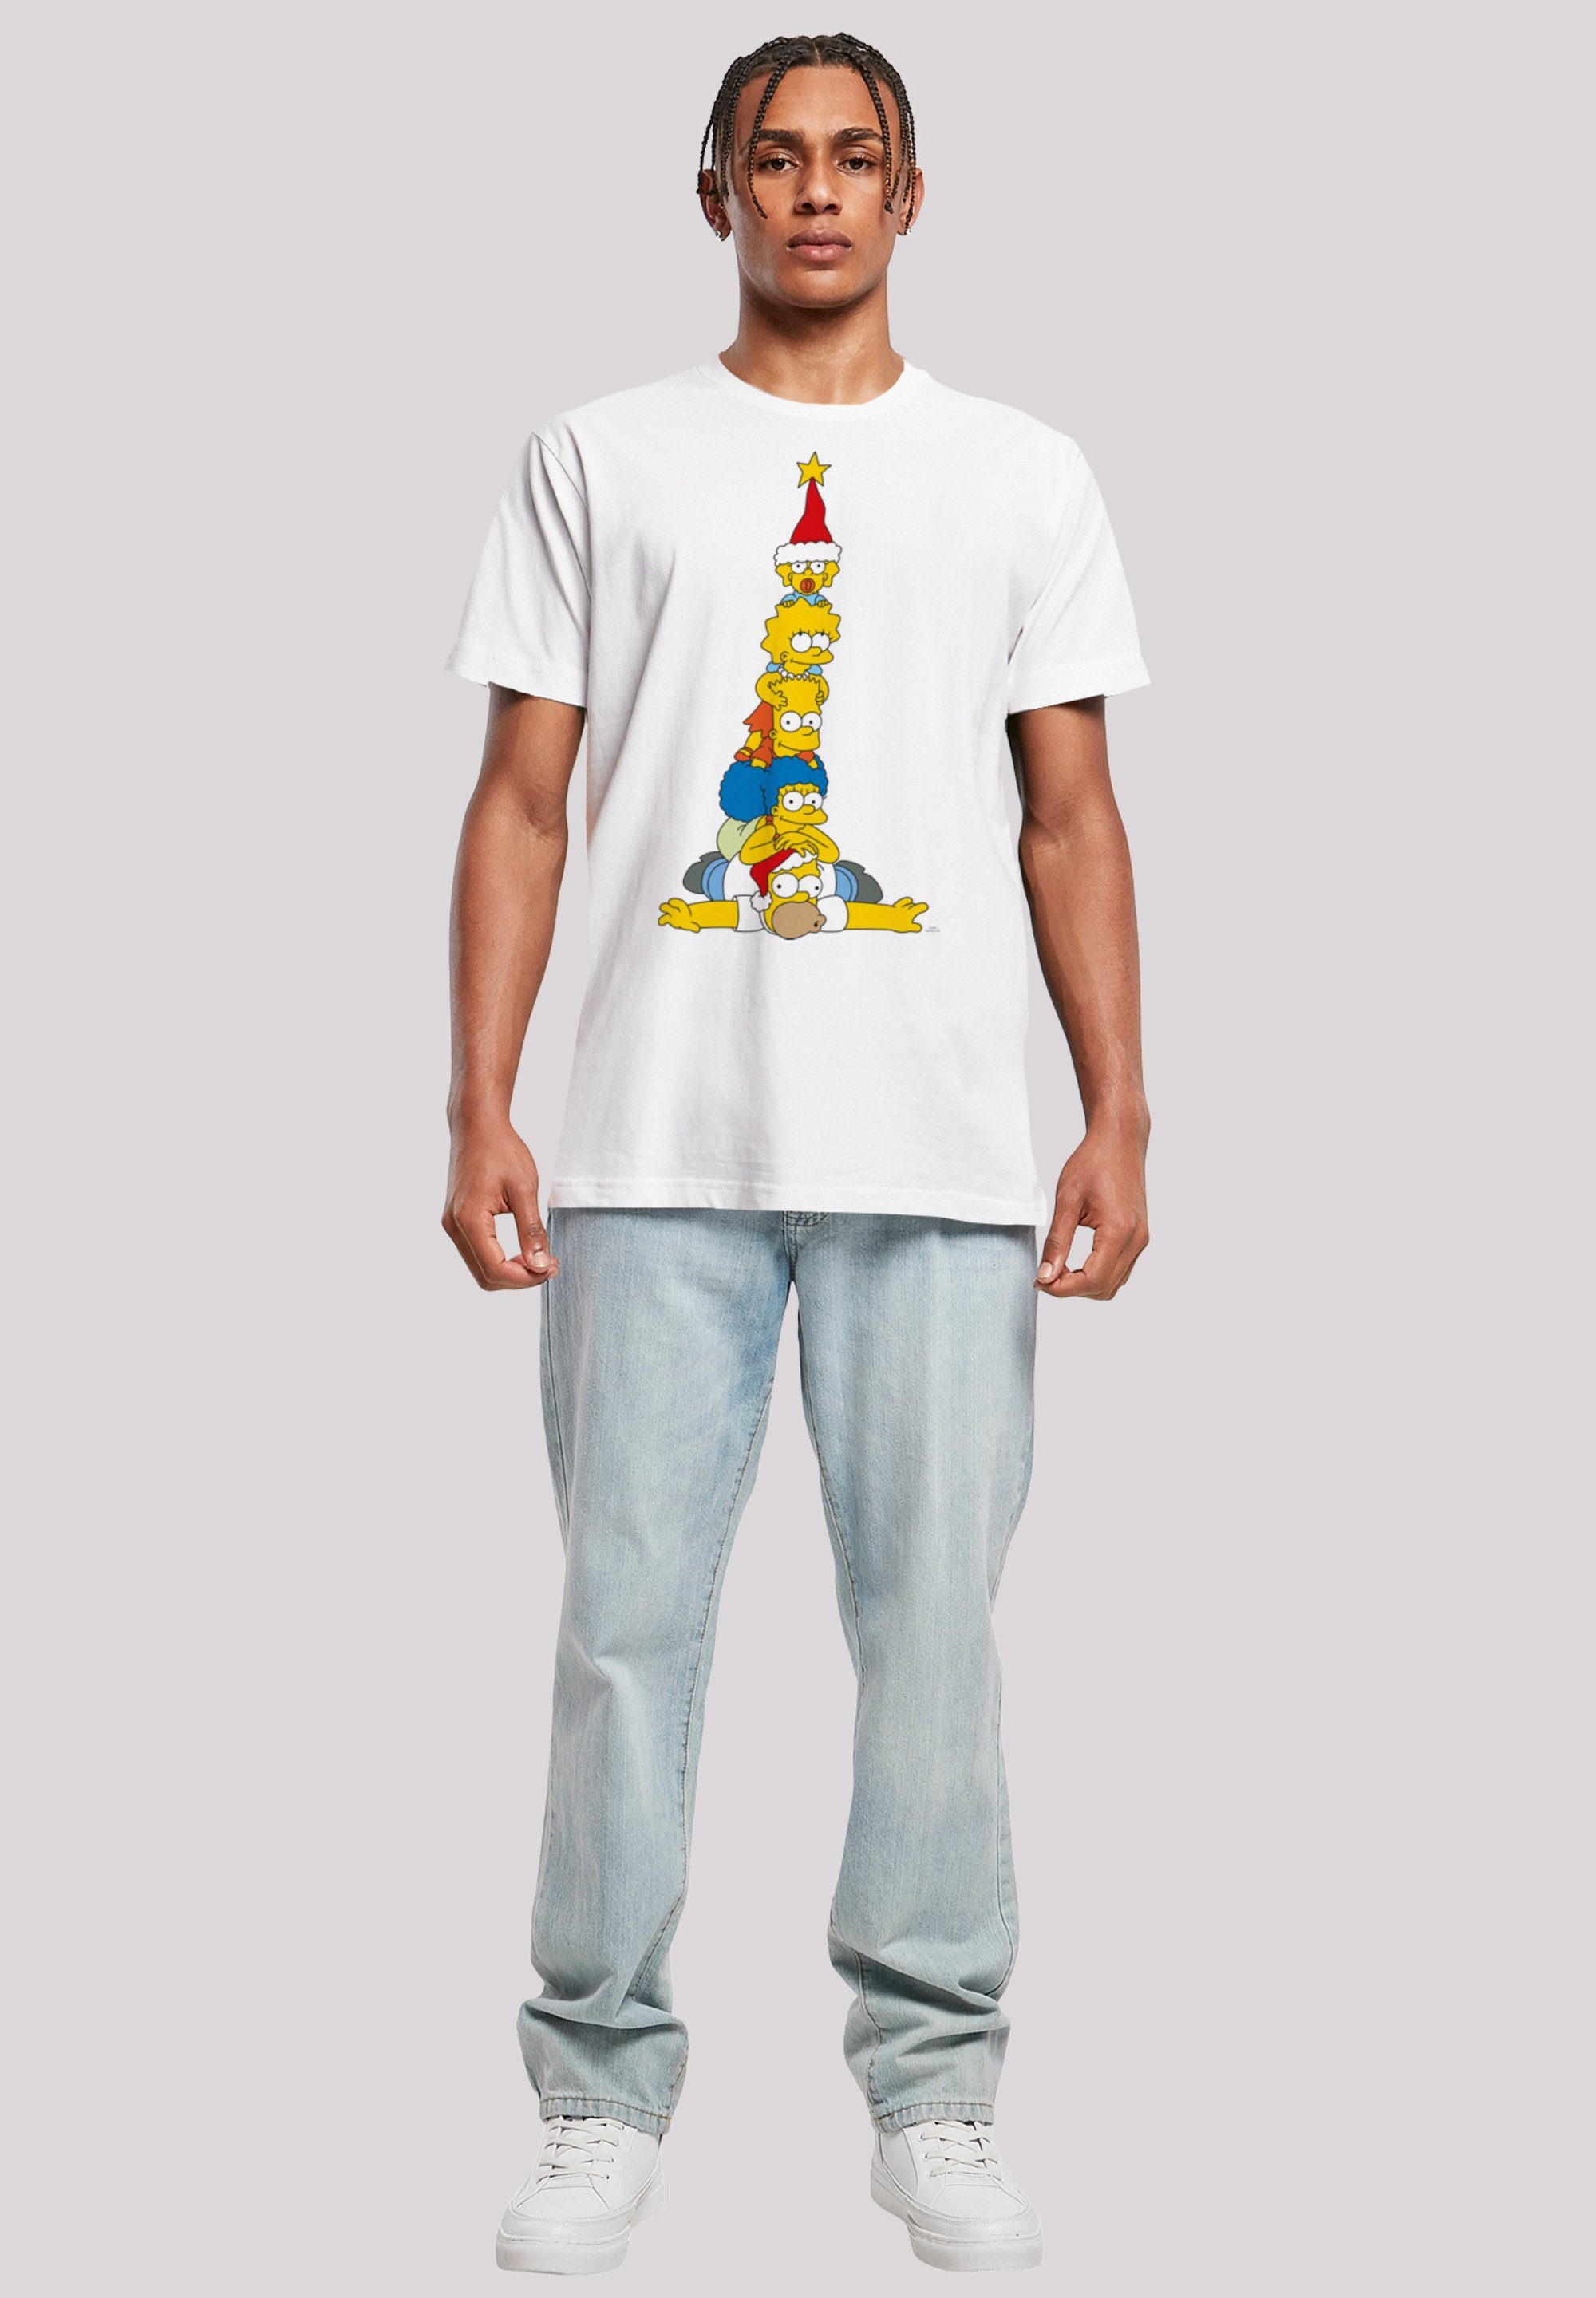 F4NT4STIC T-Shirt The Simpsons Christmas Family Weihnachtsbaum weiß Print